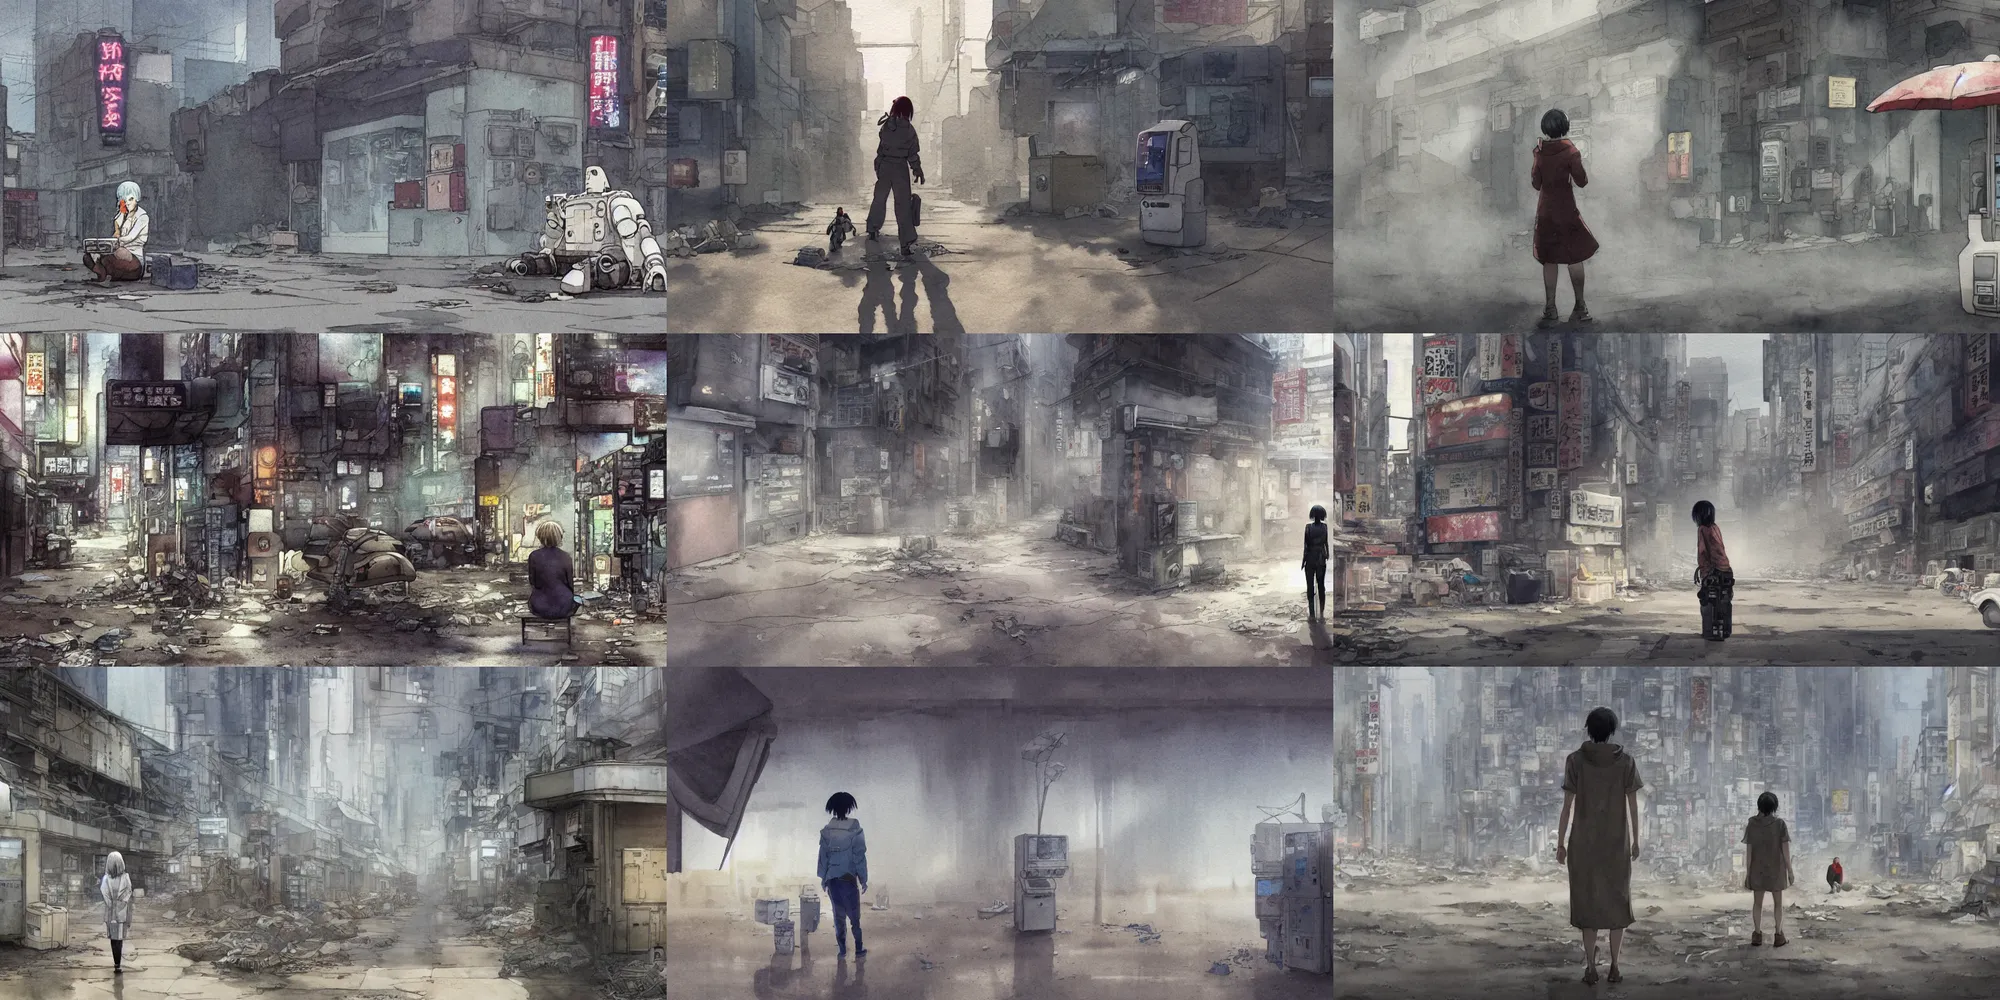 Prompt: incredible wide screenshot, simple watercolor, paper texture, katsuhiro otomo ghost in the shell movie scene, distant shot of grey hoody girl side view sitting under a parasol in deserted dusty shinjuku junk town, alone astronaut exploring, broken vending machines, old pawn shop, bright sun bleached ground, mud, fog, dust, windy, scary chameleon face muscle robot monster lurks in the background, ghost mask, teeth, animatronic, black smoke, pale beige sky, junk tv, texture, strange, impossible, fur, spines, mouth, pipe brain, shell, brown mud, dust, bored expression, overhead wires, telephone pole, dusty, dry, pencil marks, genius party,shinjuku, koju morimoto, katsuya terada, masamune shirow, tatsuyuki tanaka hd, 4k, remaster, dynamic camera angle, deep 3 point perspective, fish eye, dynamic scene